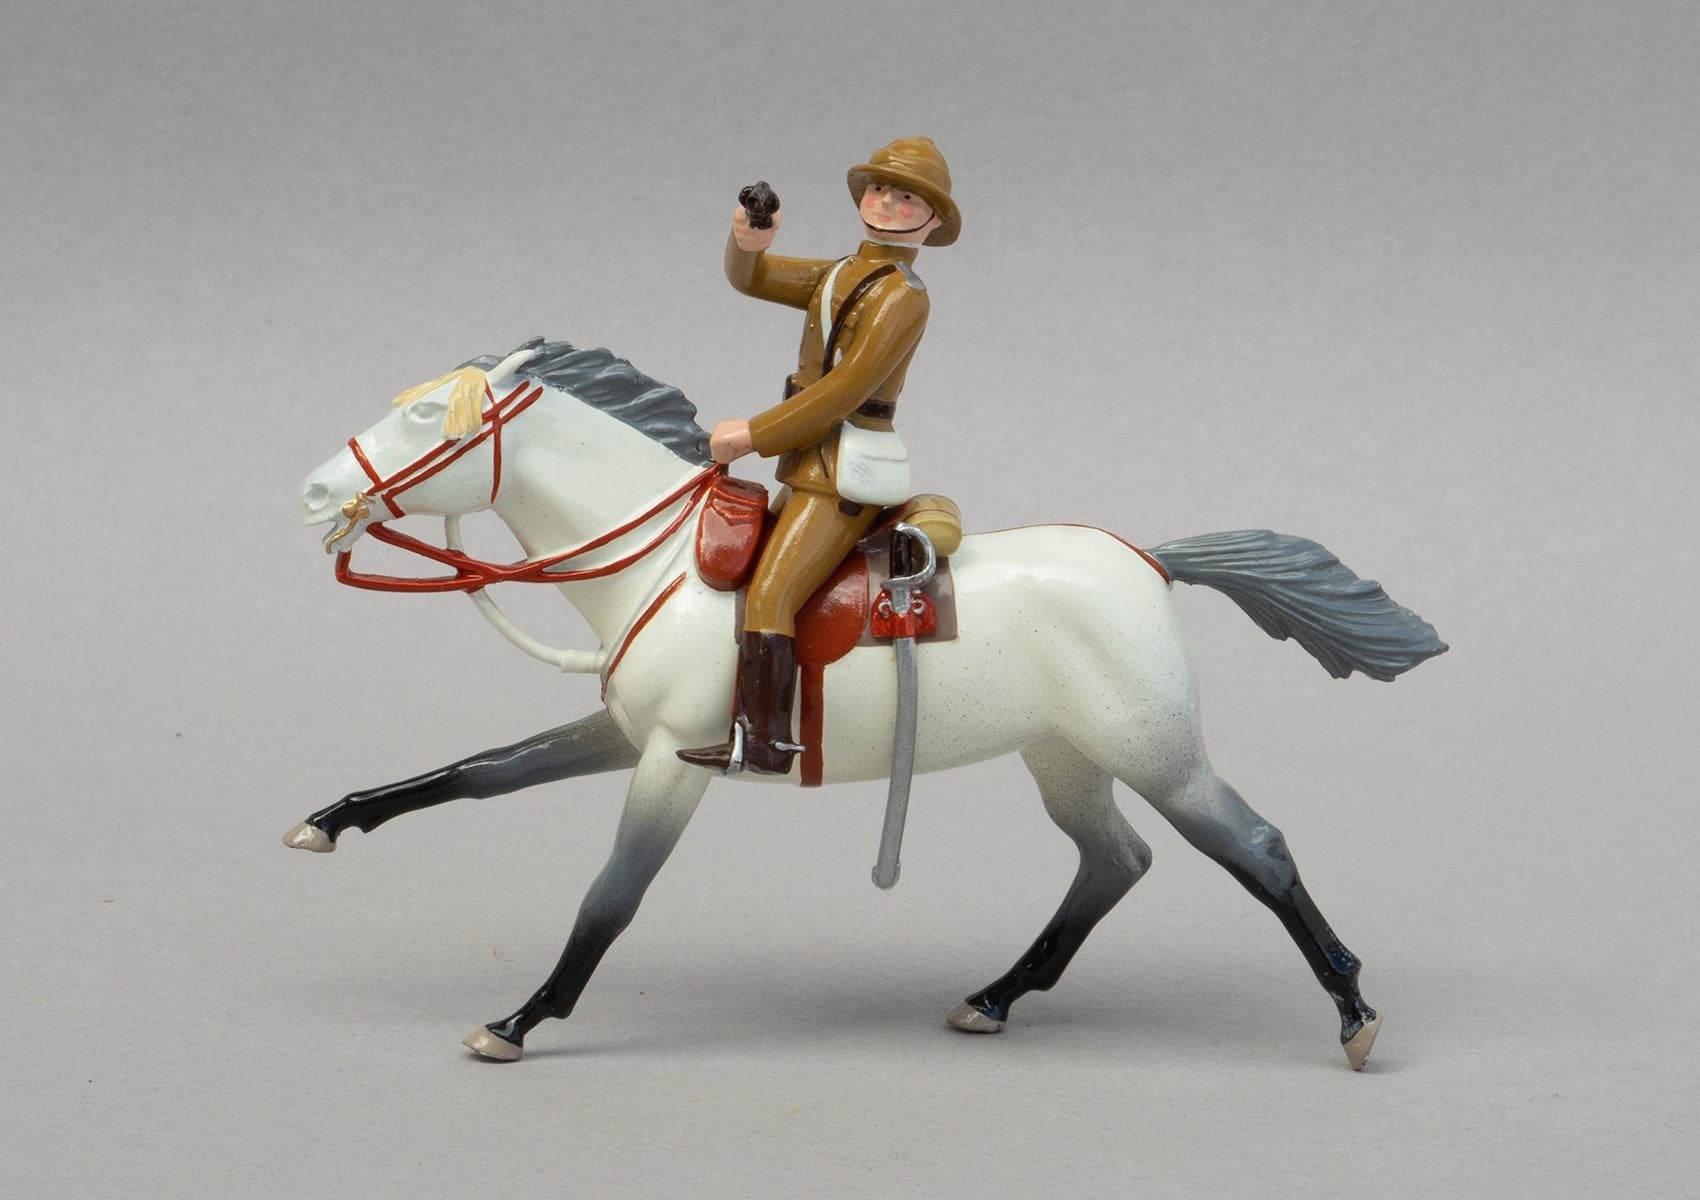 Set 142 Lieutenant Winston Churchill | British Cavalry | Sudan War | Lieutenant Winston Churchill of the 4th Hussars. Single mounted figure on grey horse with mauser pistol | Omdurman, Relief of Gordon, Nile River | © Imperial Productions | Sculpt by David Cowe